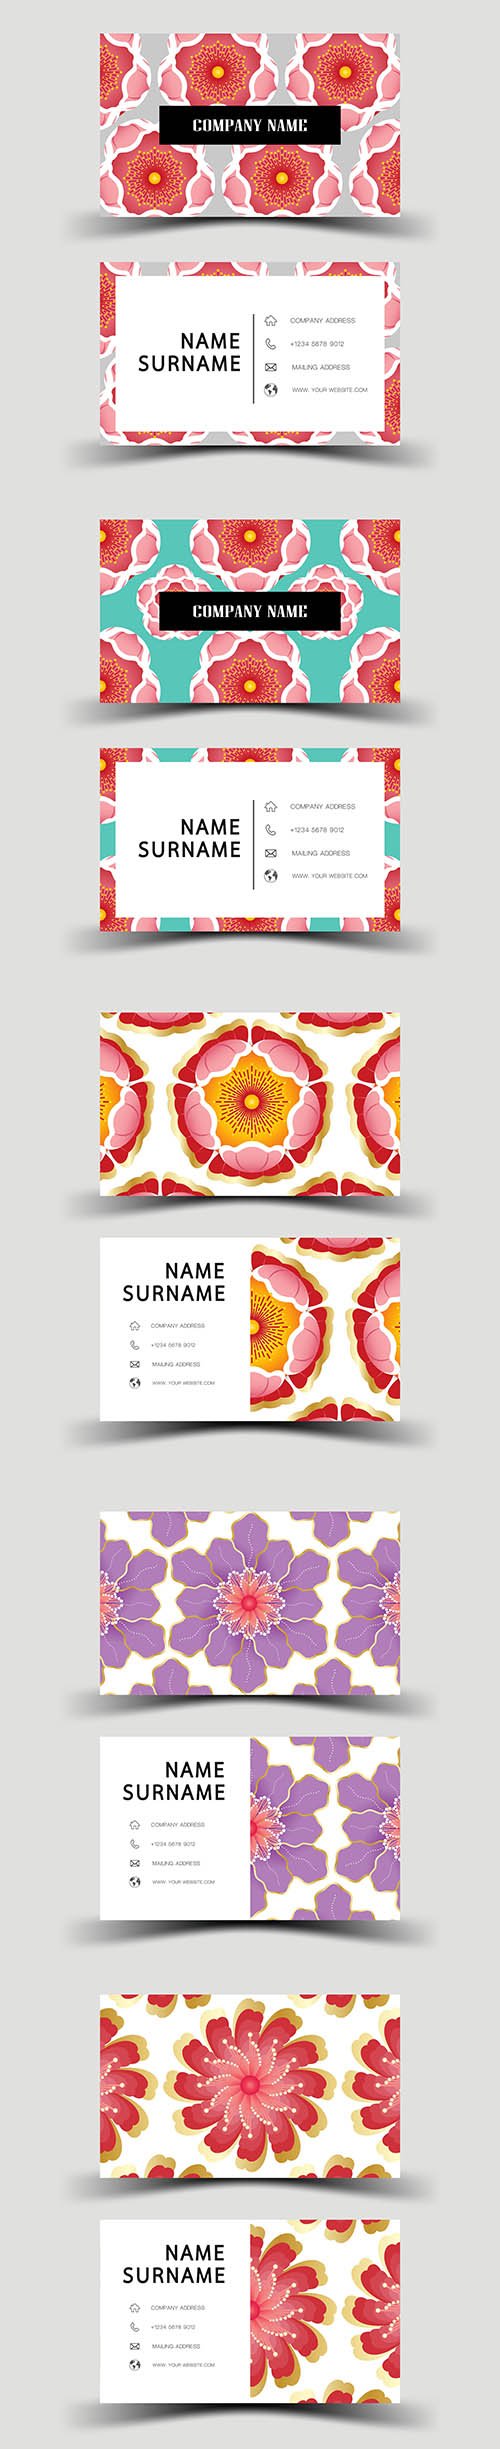 Business Card Design with Flower Background Set